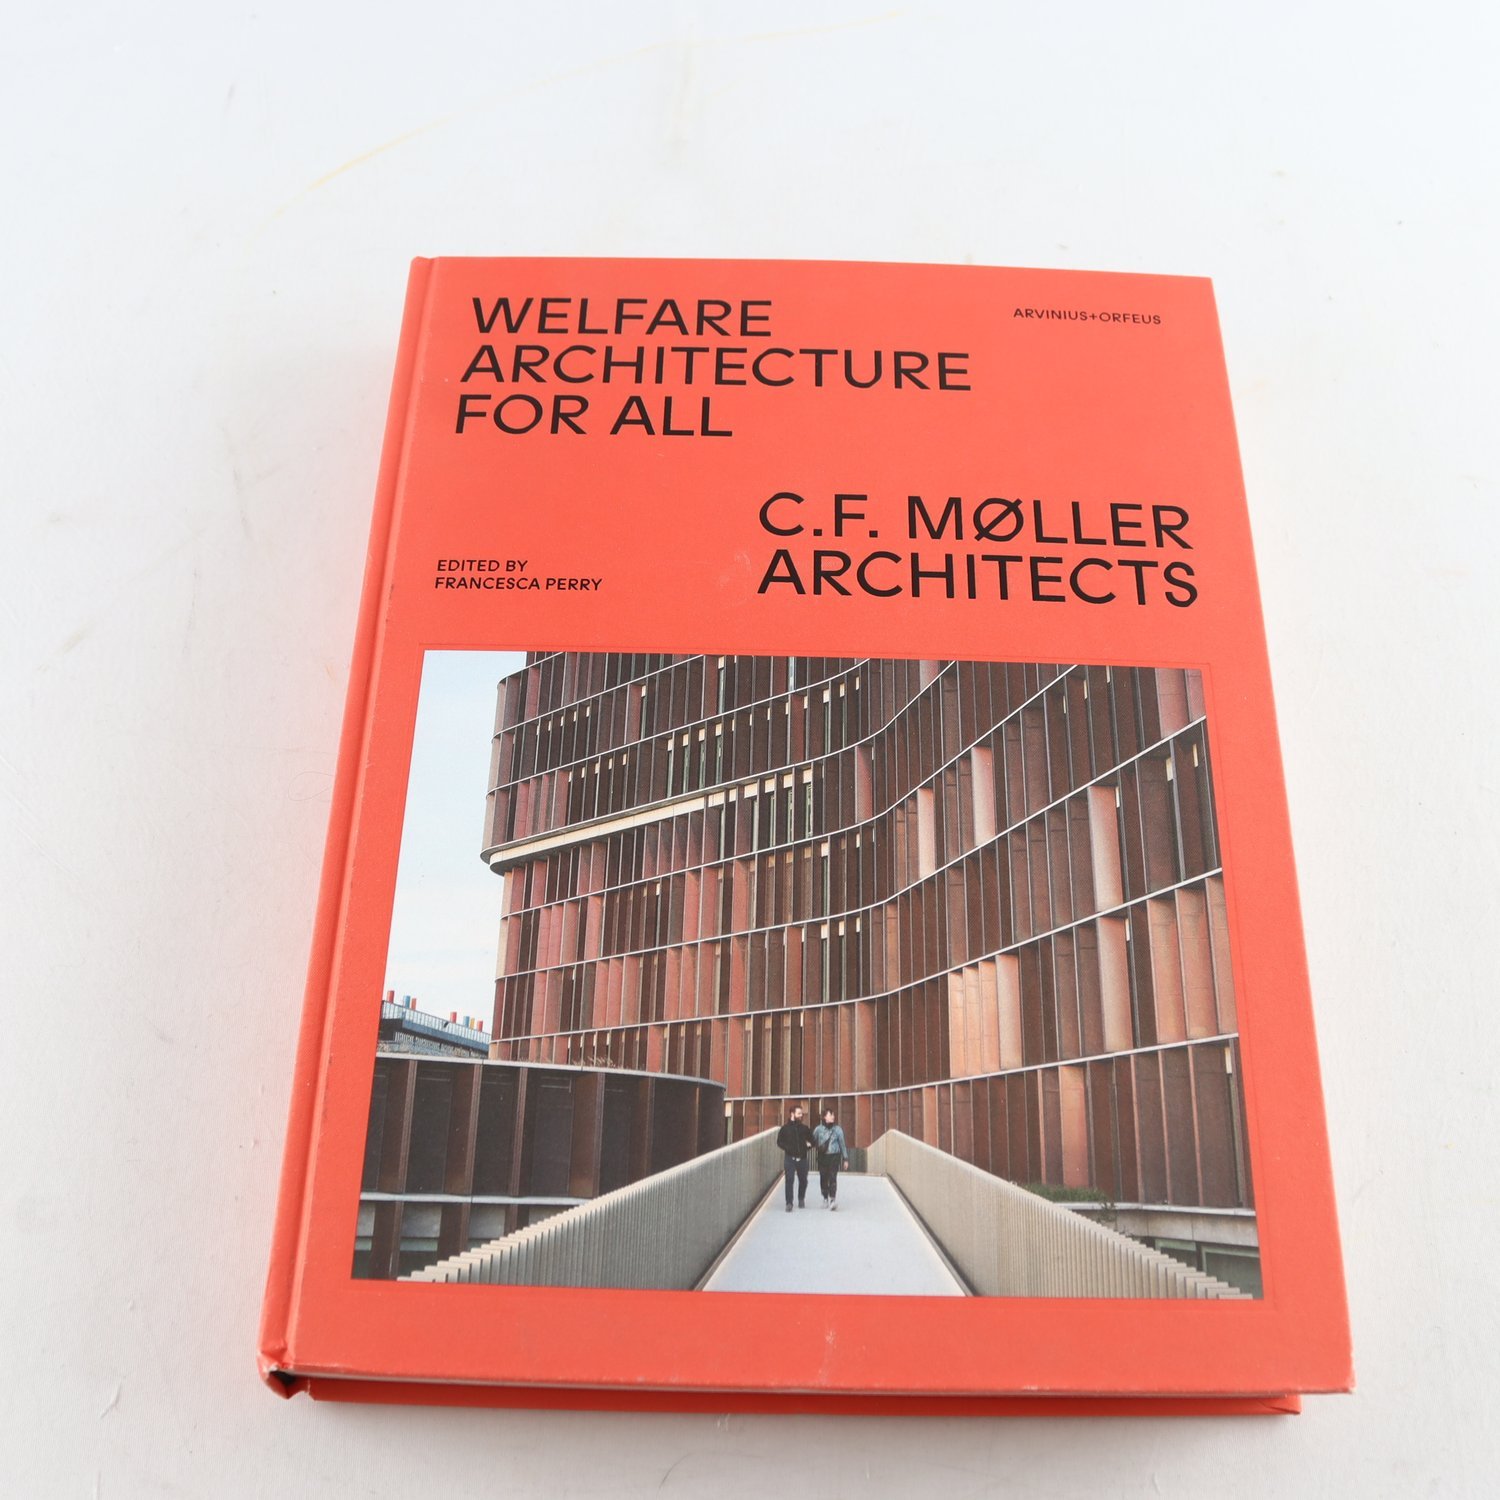 Welfare Architecture for All, C.F. Möller Architects, Ed. Francesca Perry